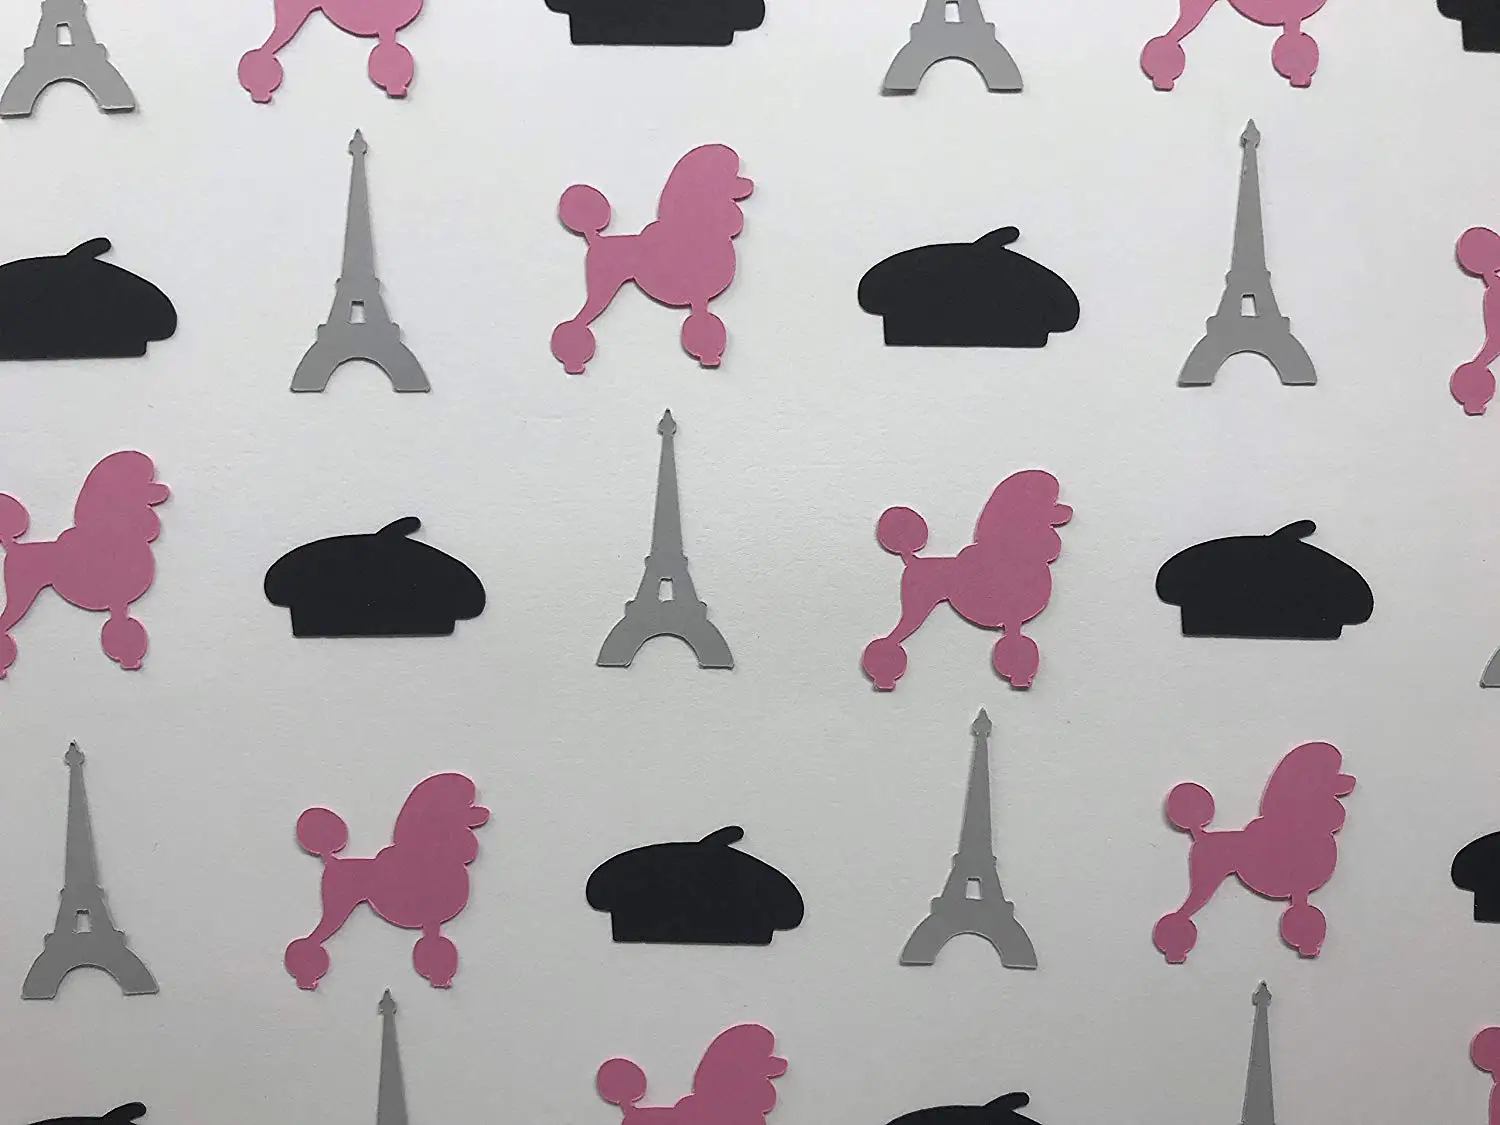 Cheap Paris Themed Party Decorations - Gez1klgkr1lysm - You can also get party favors like bags, molded cups, plush.